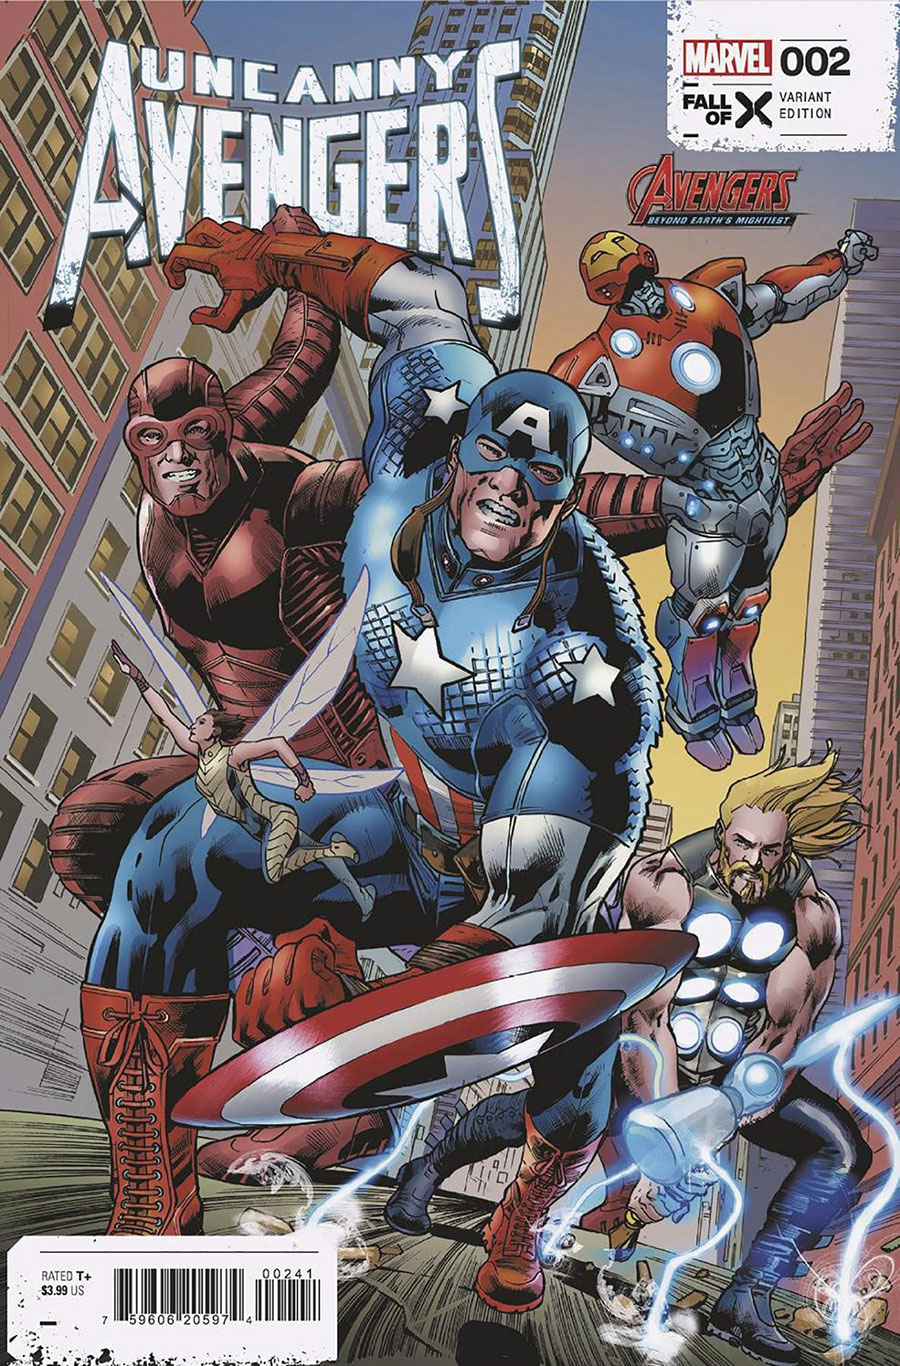 Uncanny Avengers Vol 4 #2 Cover B Variant Bryan Hitch Avengers 60th Anniversary Cover (Fall Of X Tie-In)